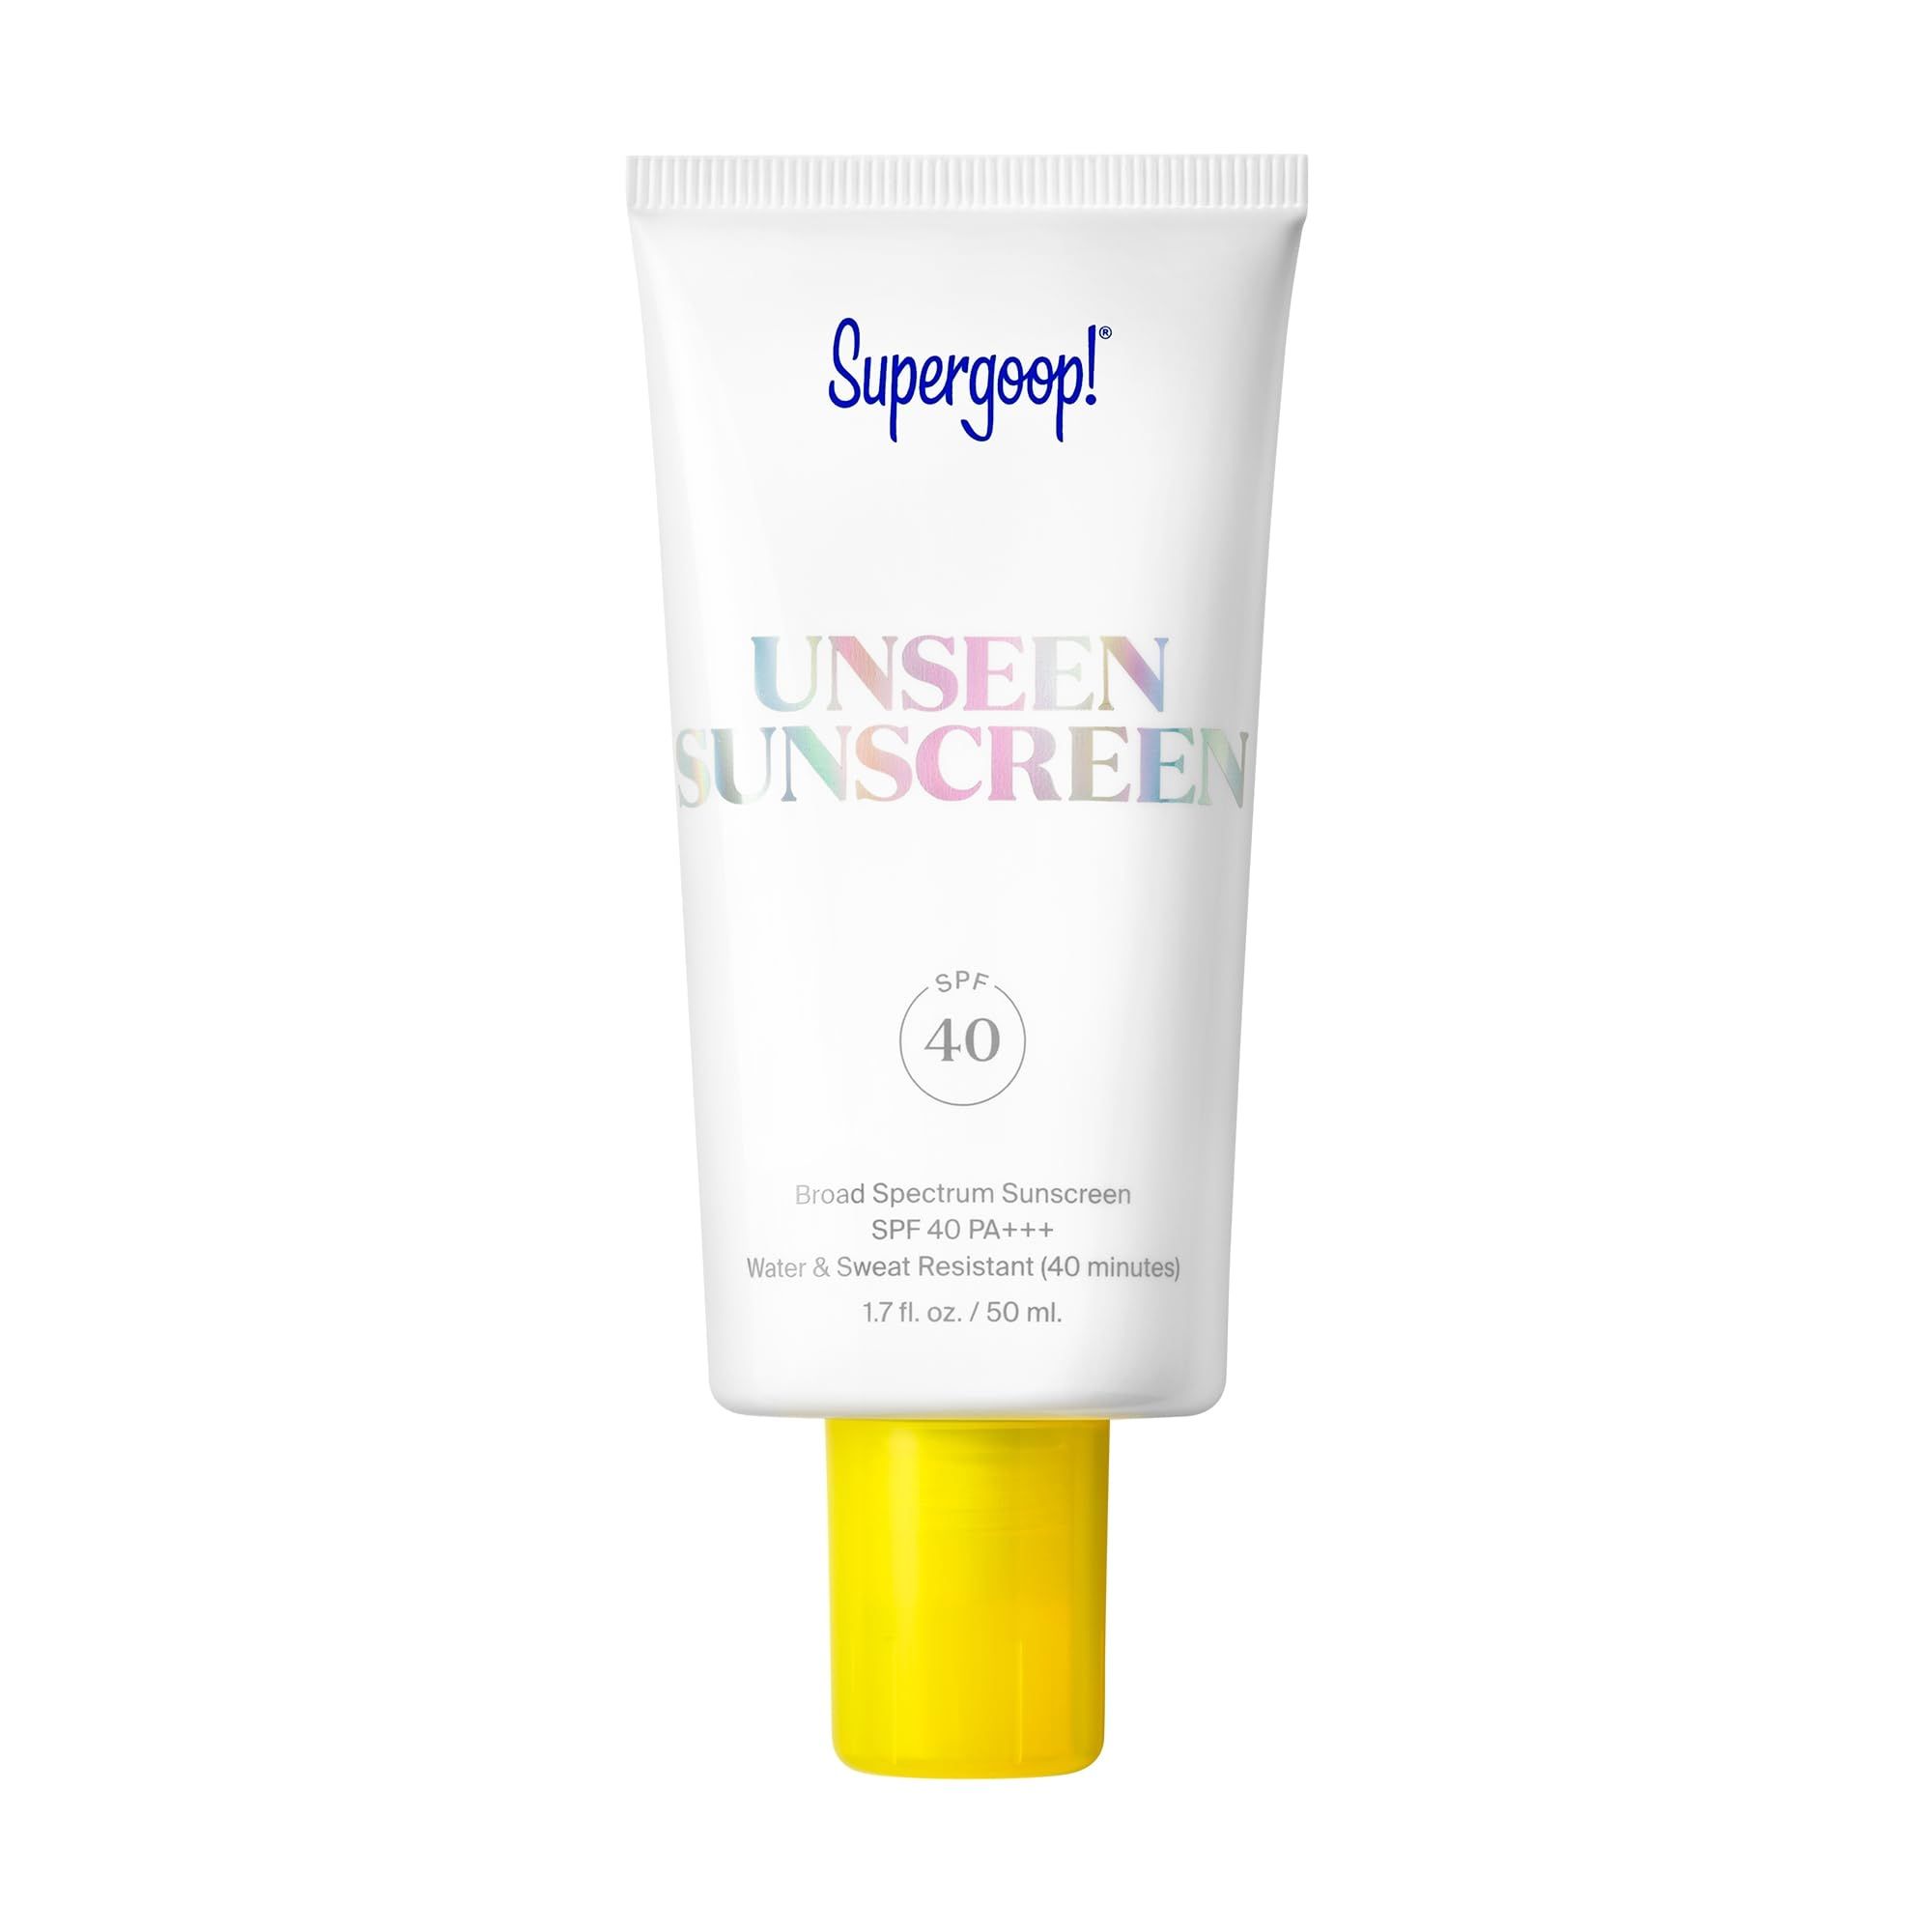 Supergoop! Unseen Sunscreen - SPF 40-1.7 fl oz - Invisible, Broad Spectrum Face Sunscreen - Weightless, Scentless, and Oil Free - For All Skin Types and Skin Tones | Amazon (US)